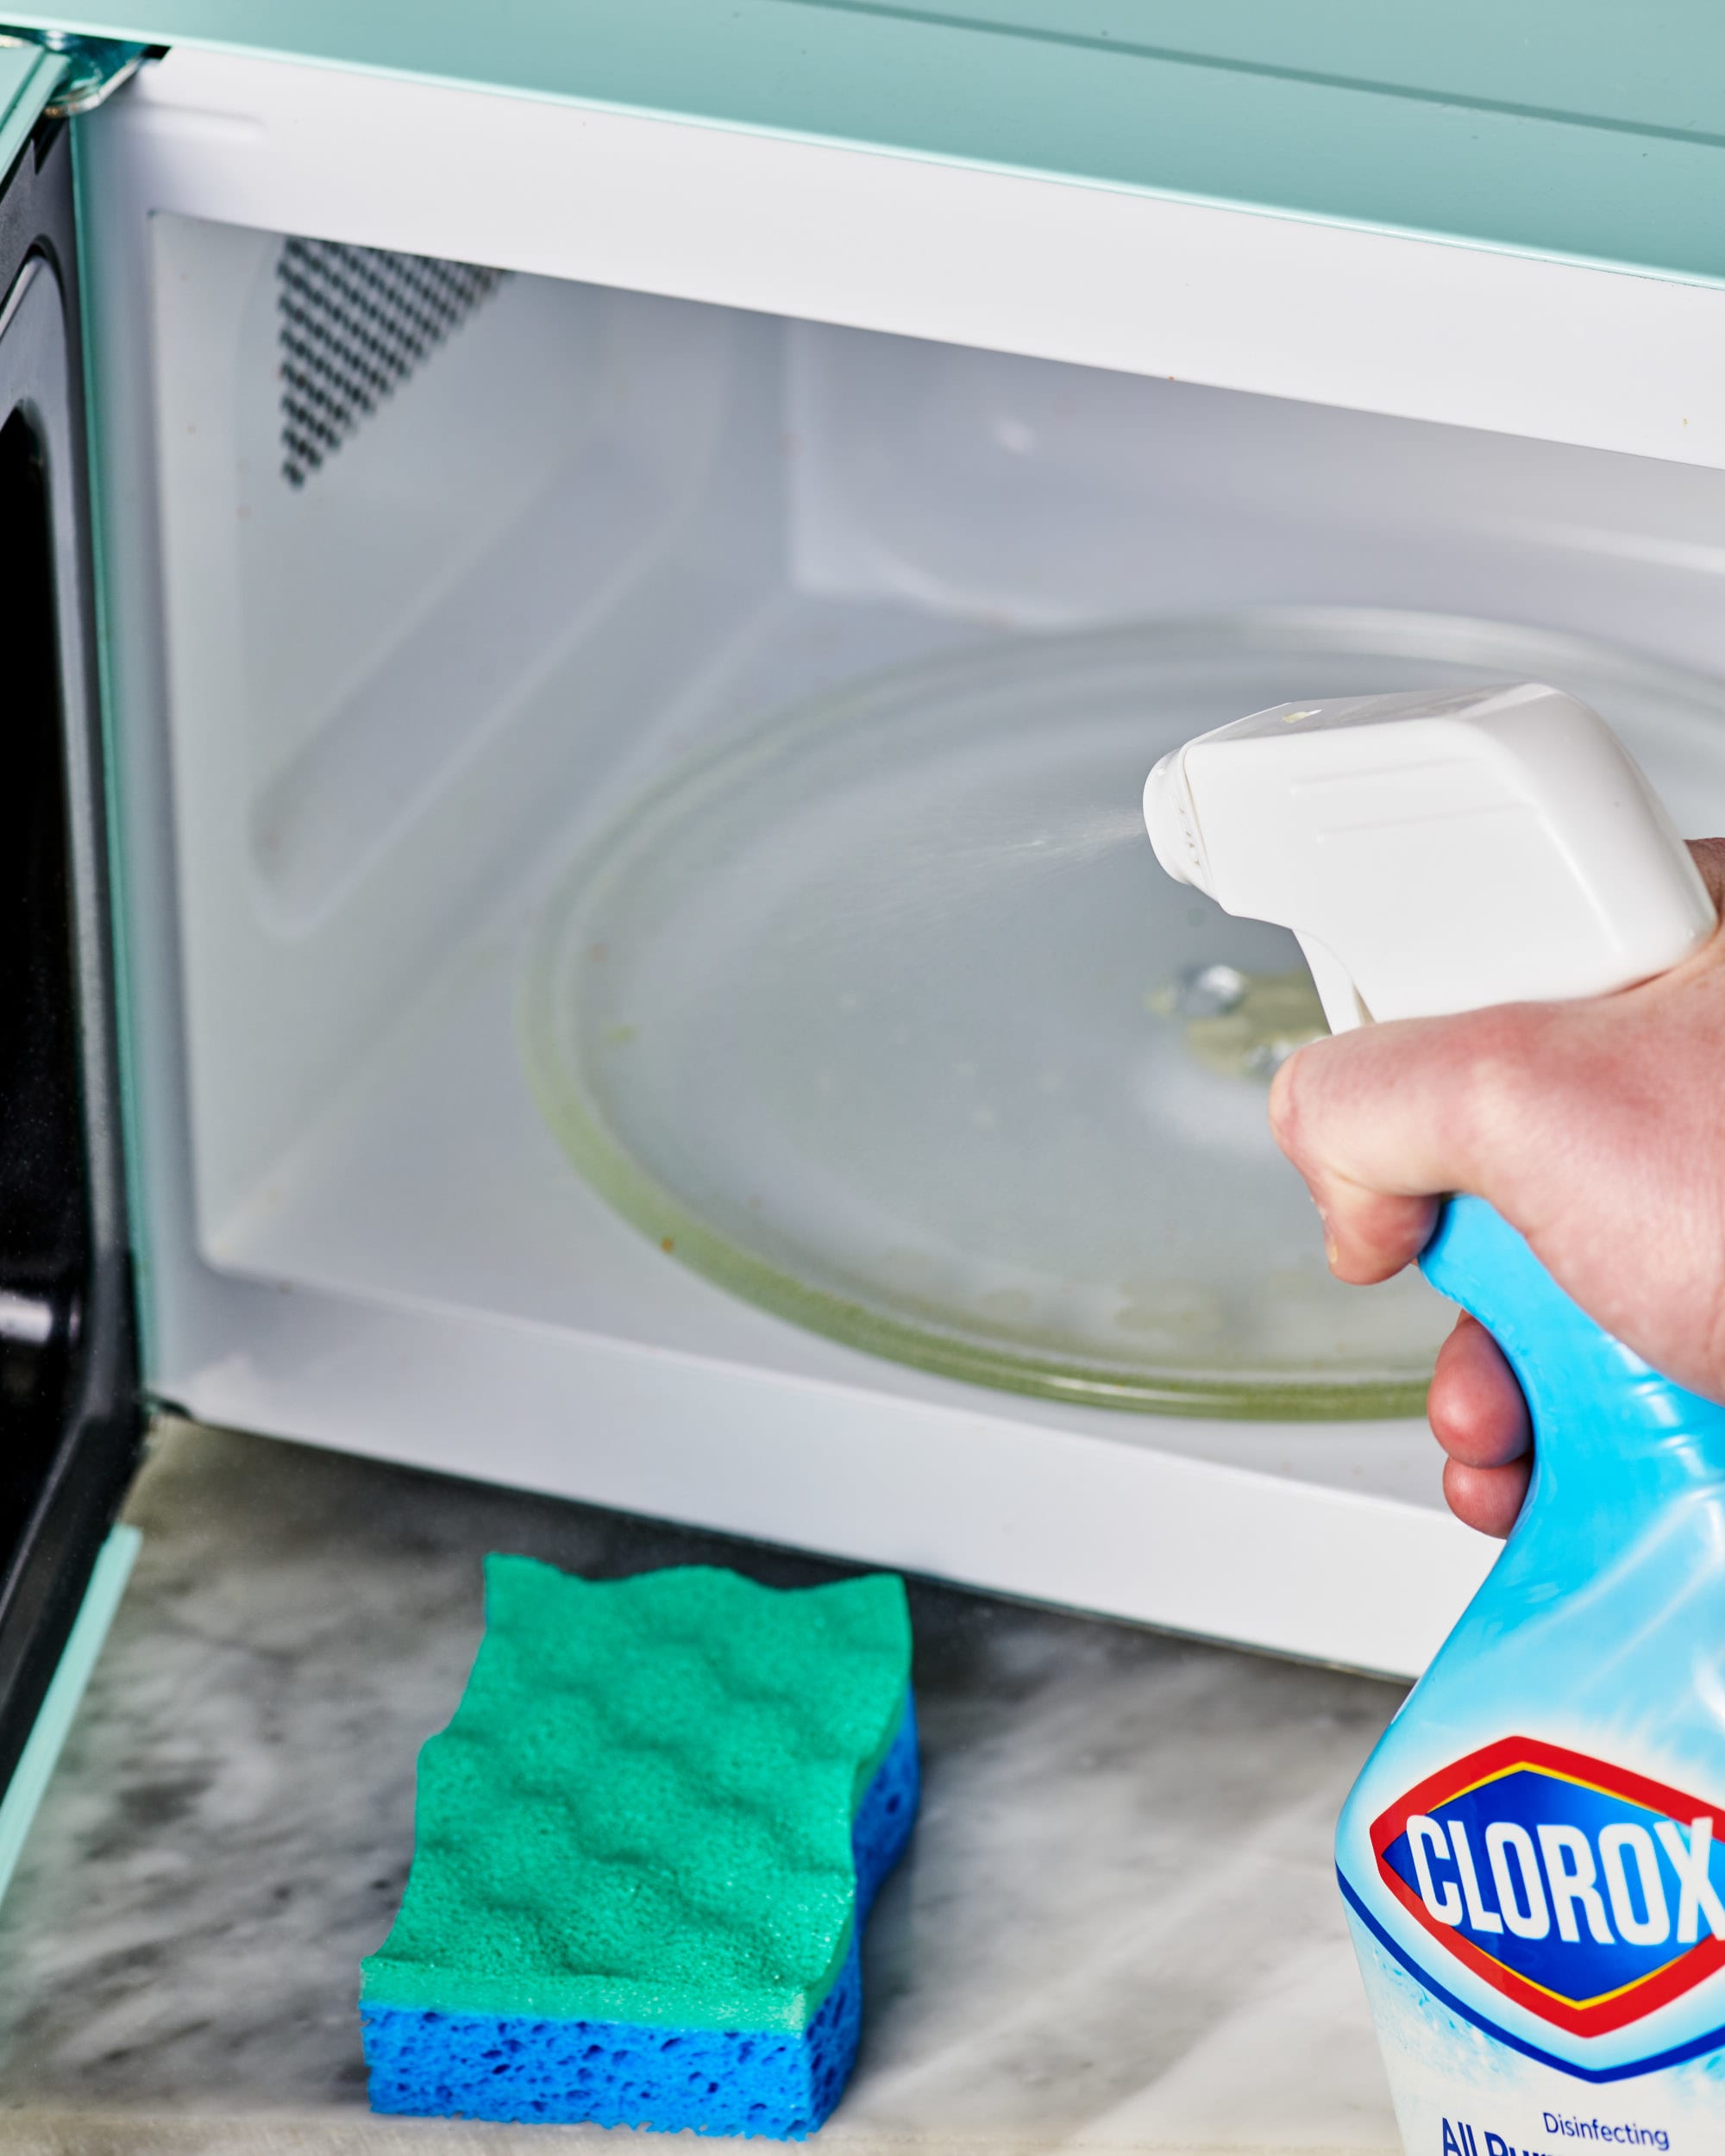 How to Clean a Microwave With Everyday Household Items